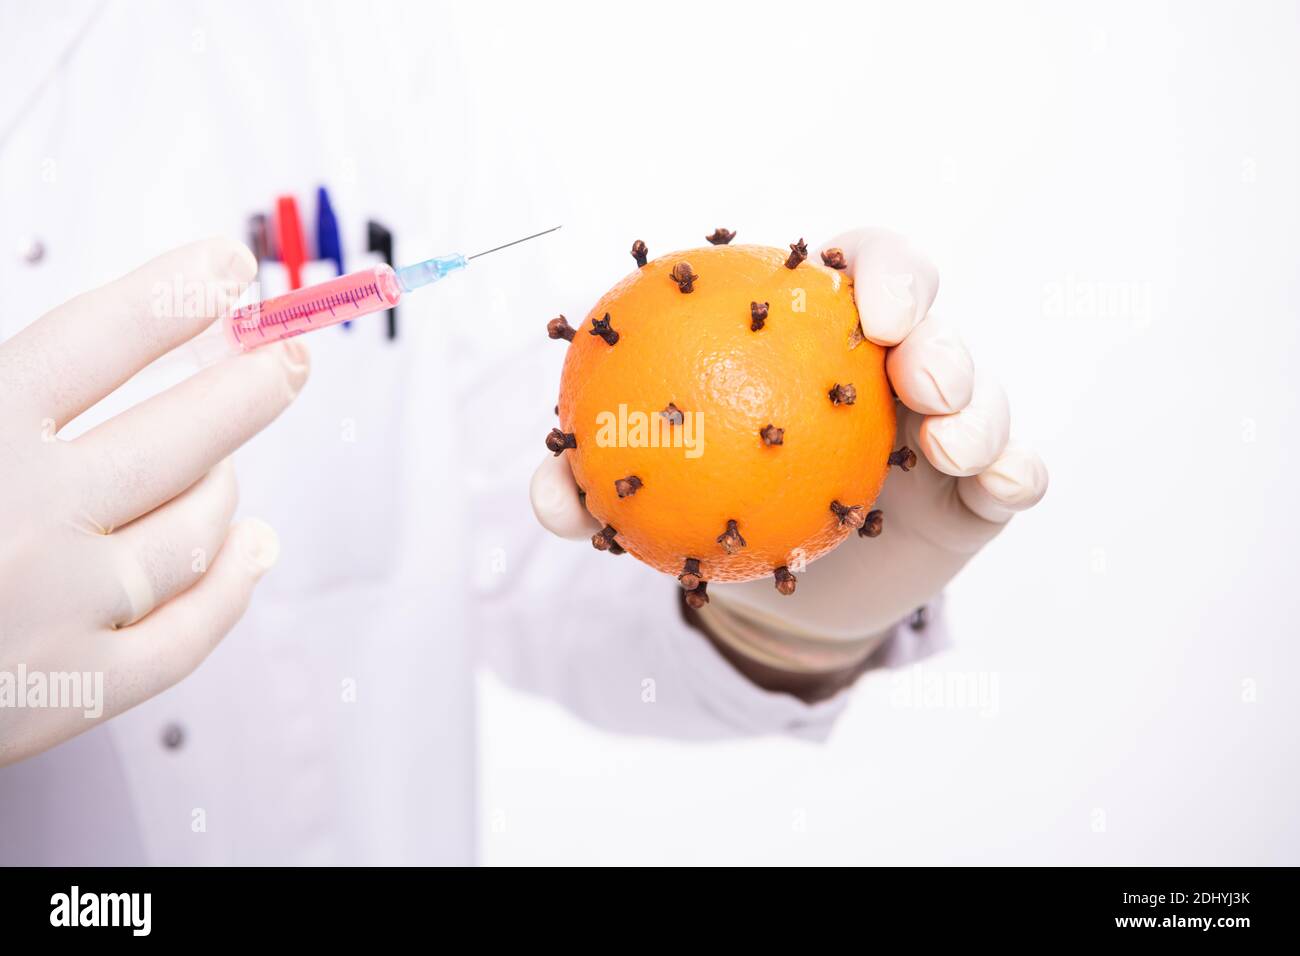 Doctors Hands, covered vith gloves, holding a vaccination (syringe) and a virus paricle Stock Photo